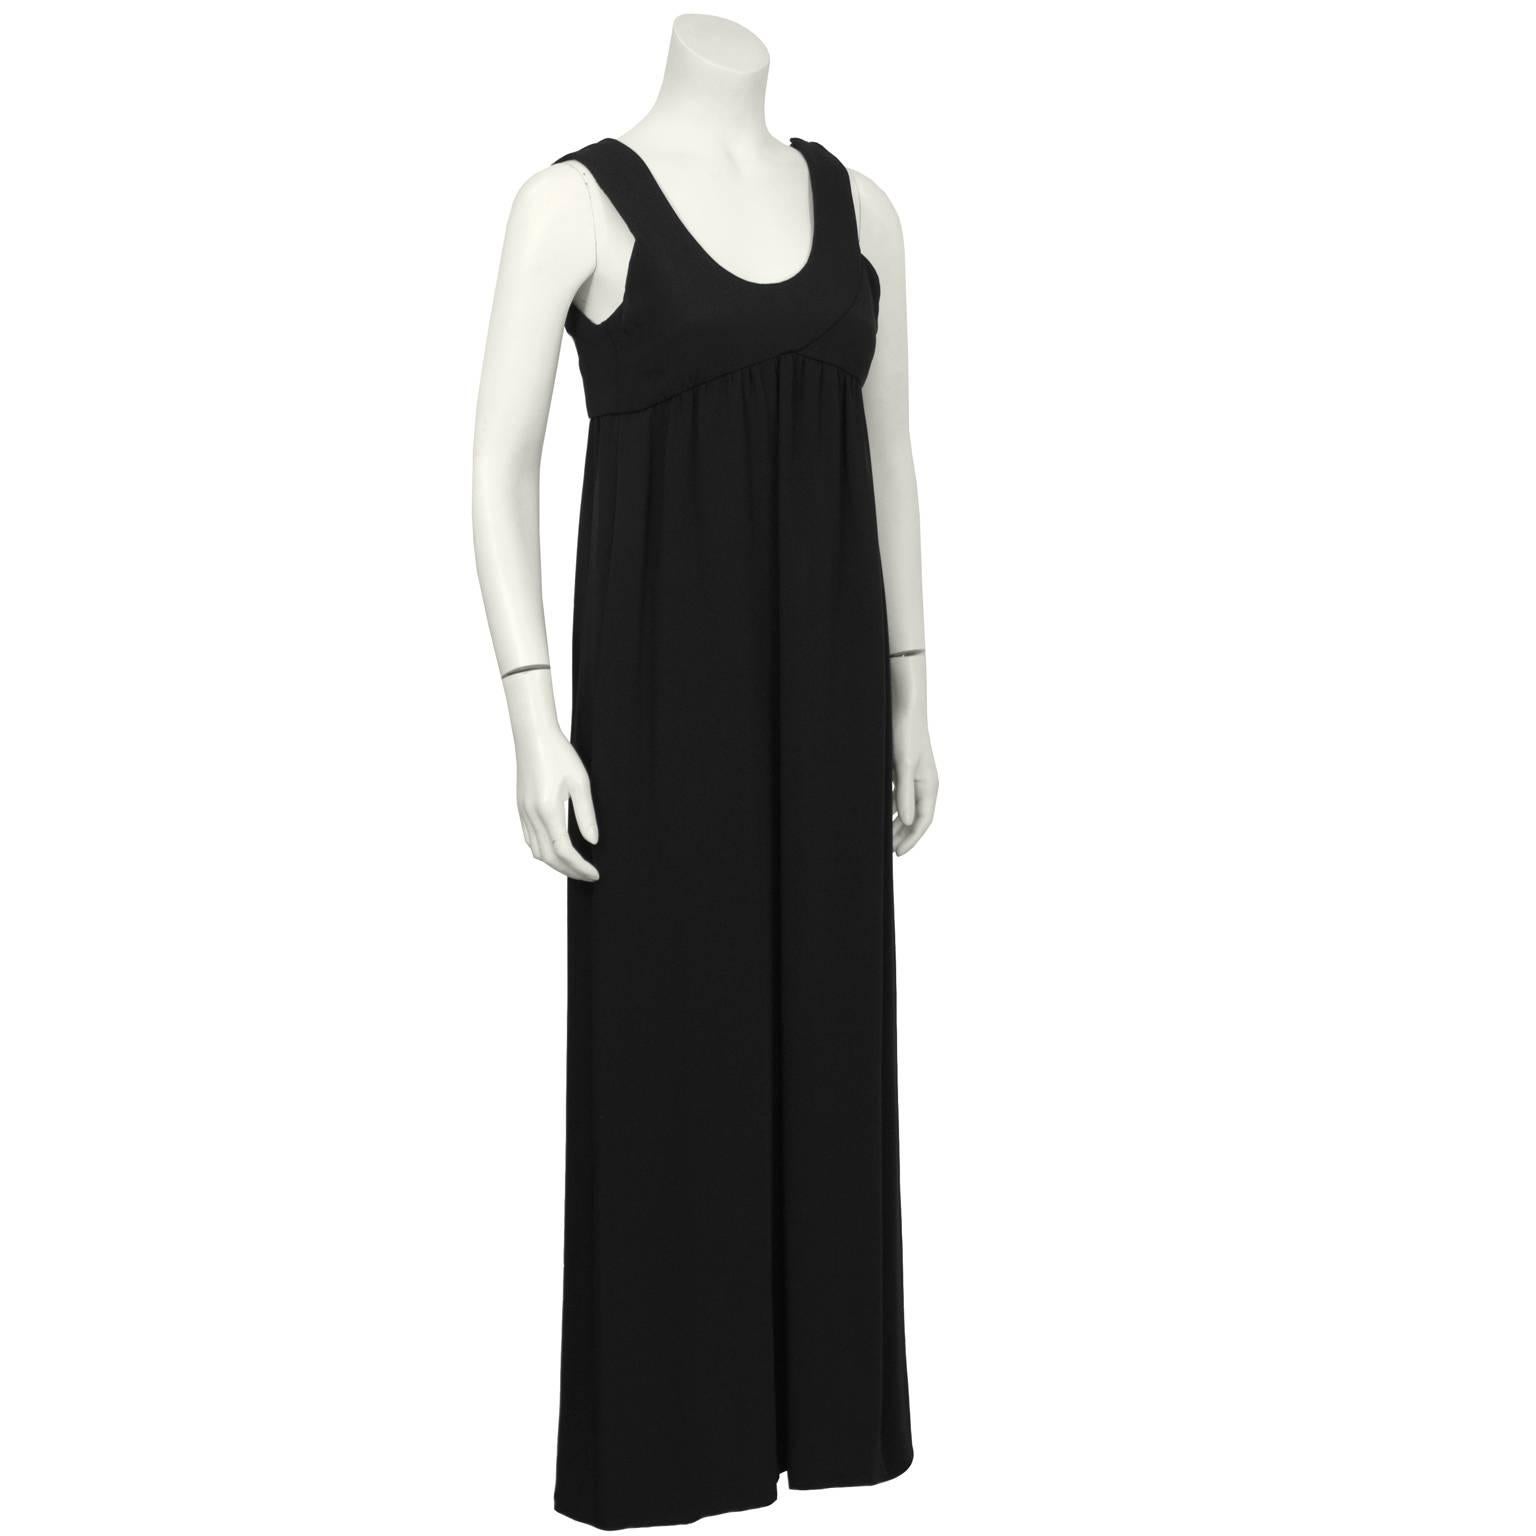 Anonymous black silk empire waist sleeveless gown from the 1970's. The simple dress has a unique bustline with an overlapping detail on the front and the back as well as gathering throughout. The U-neckline and wide shoulder straps are flattering on